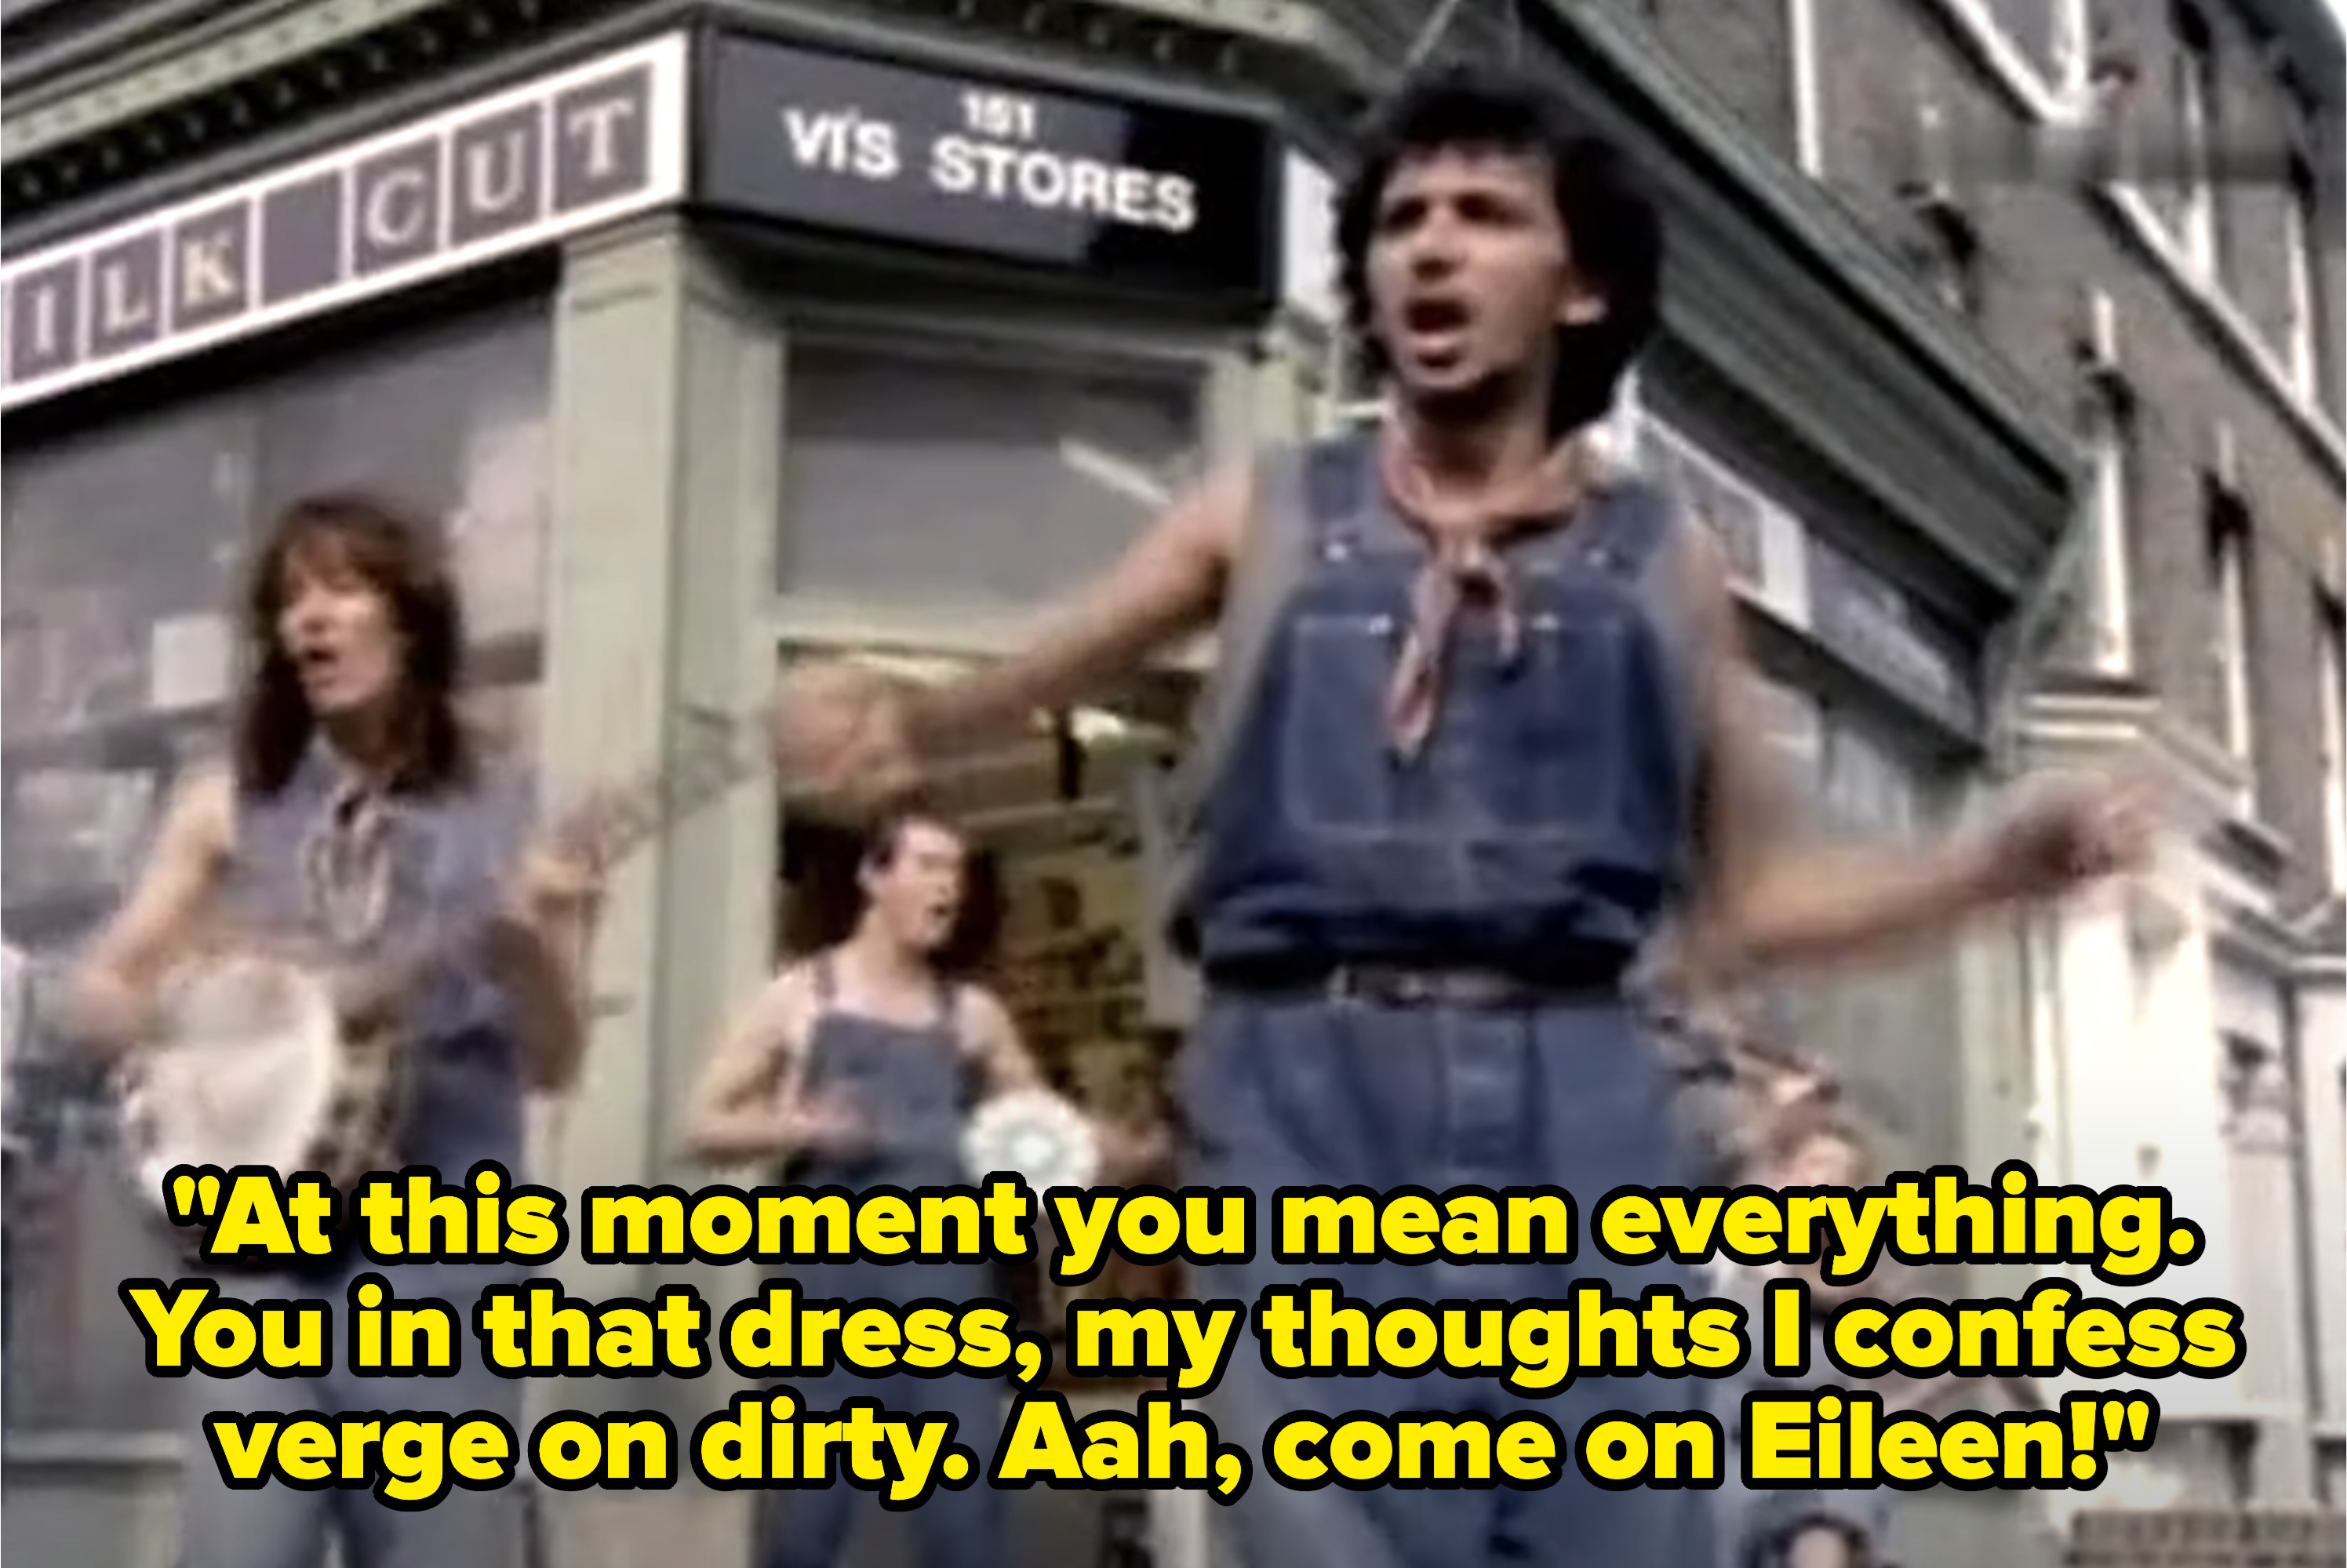 The &quot;Come on Eileen&quot; music video with lyrics, &quot;At this moment you mean everything. You in that dress, my thoughts I confess verge on dirty. Aah, come on Eileen&quot;